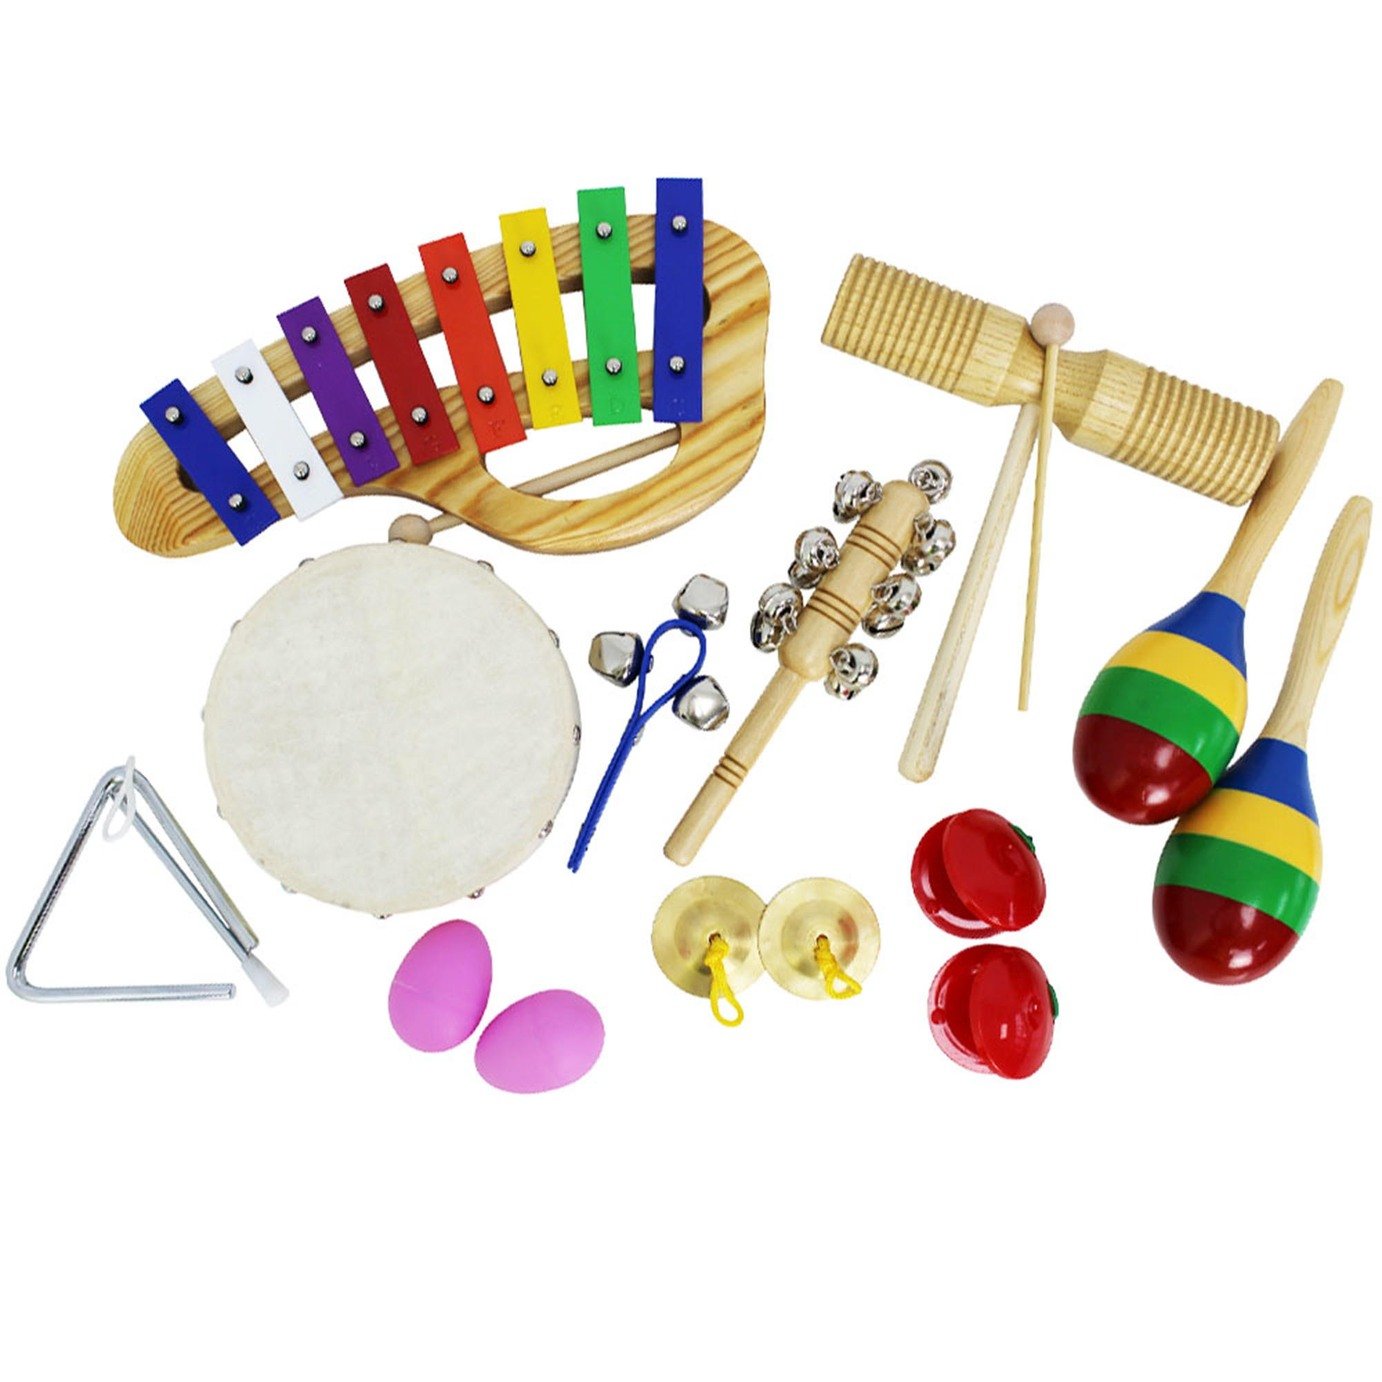 A-Star 10 Piece Children's Percussion Pack Review